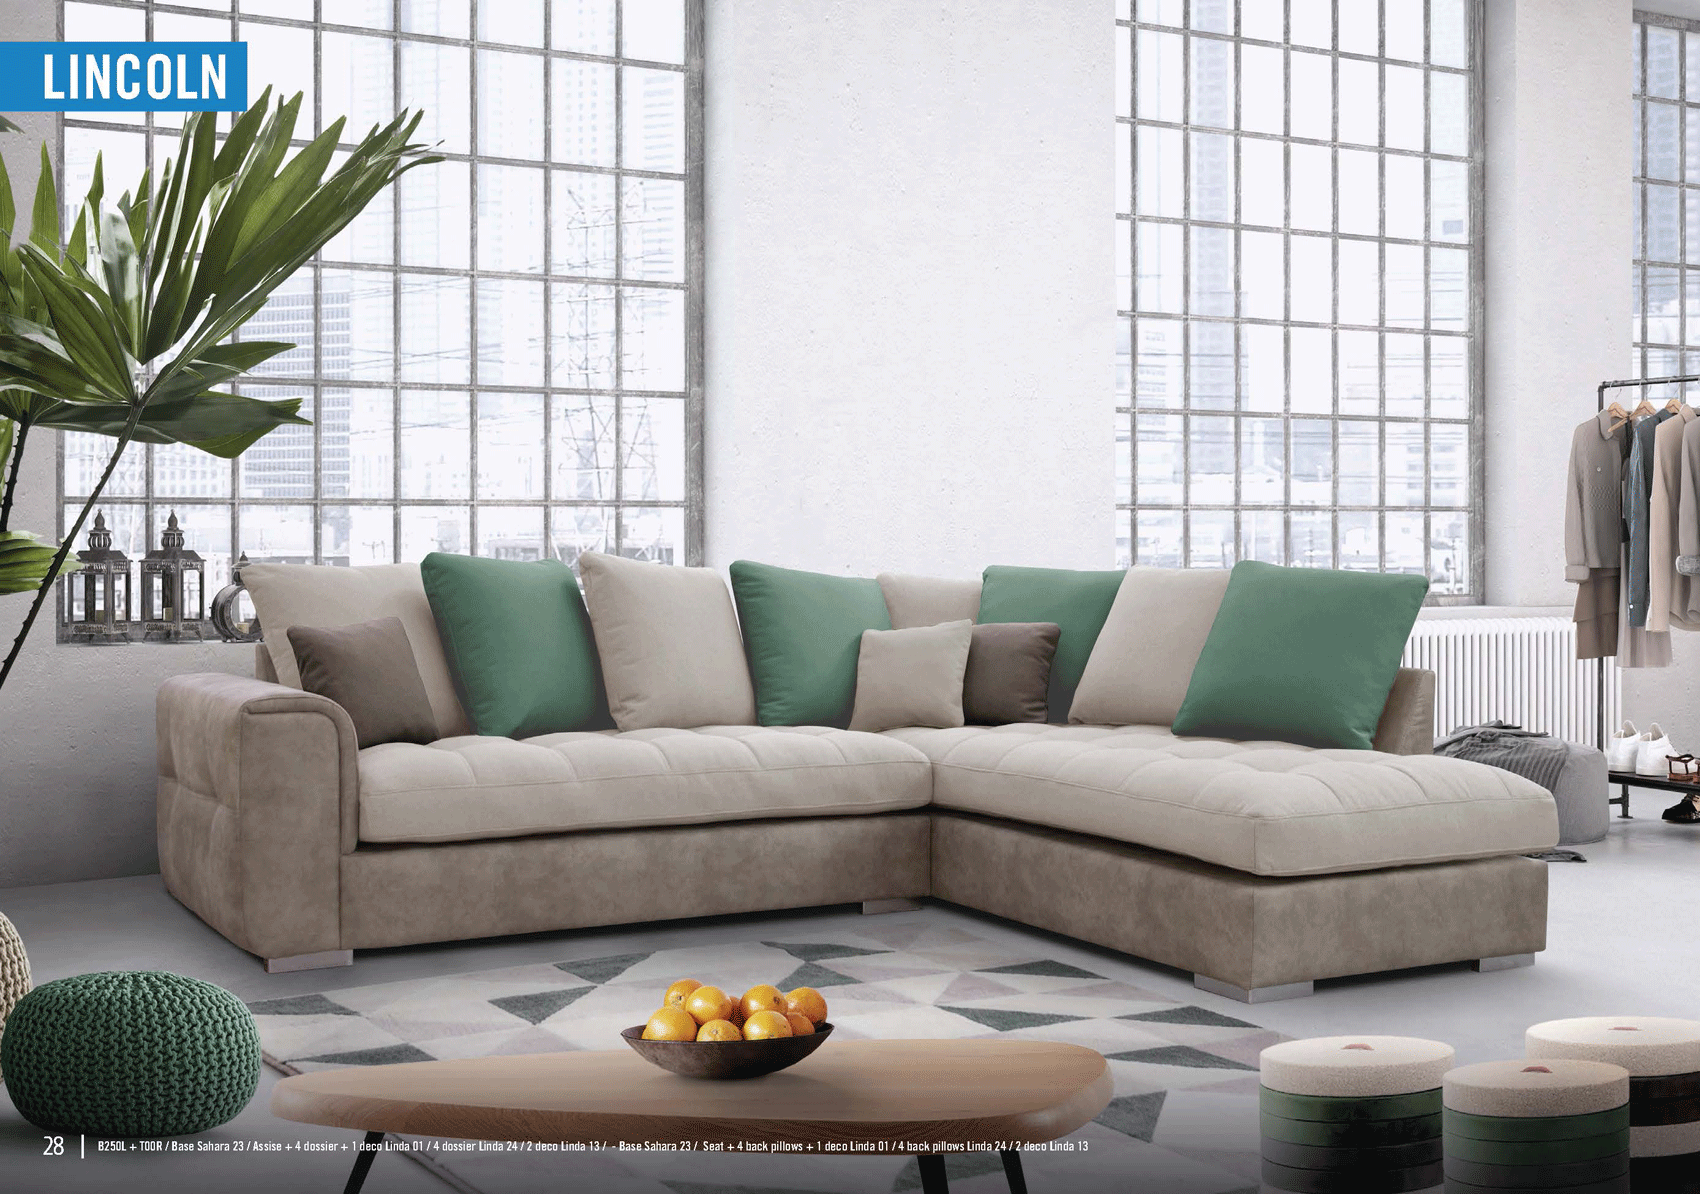 Living Room Furniture Sleepers Sofas Loveseats and Chairs Lincoln Sectional